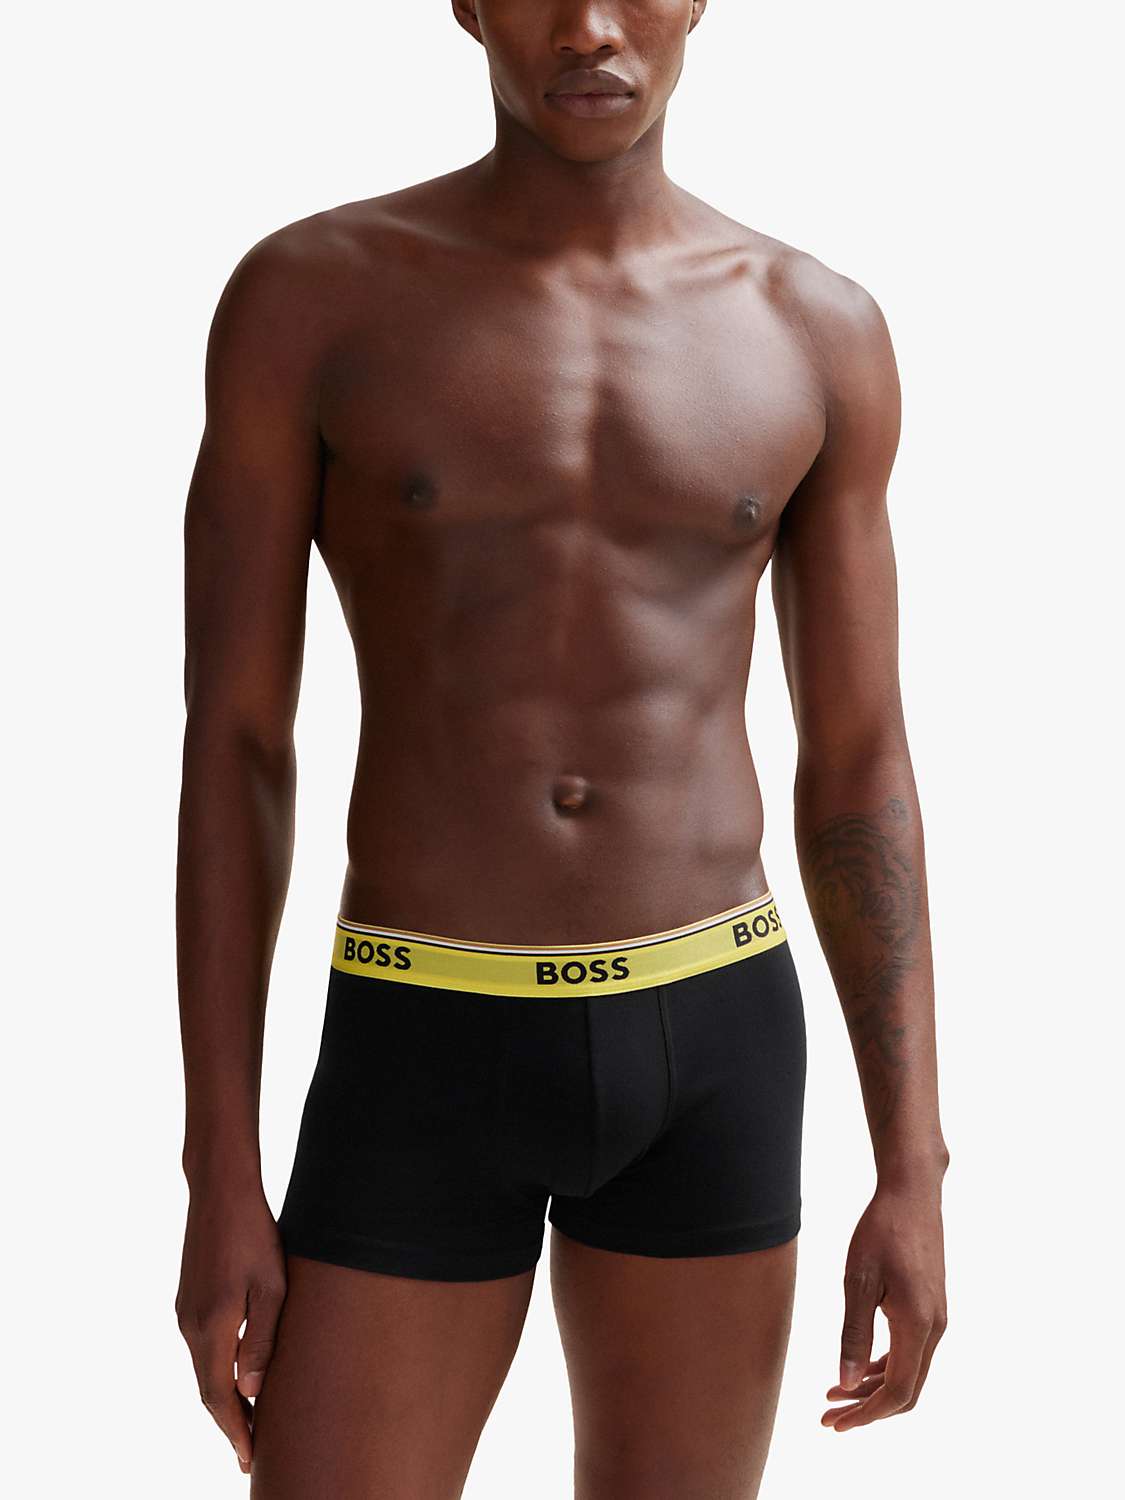 Buy BOSS Essential Style Trunks, Pack of 3, Black Online at johnlewis.com